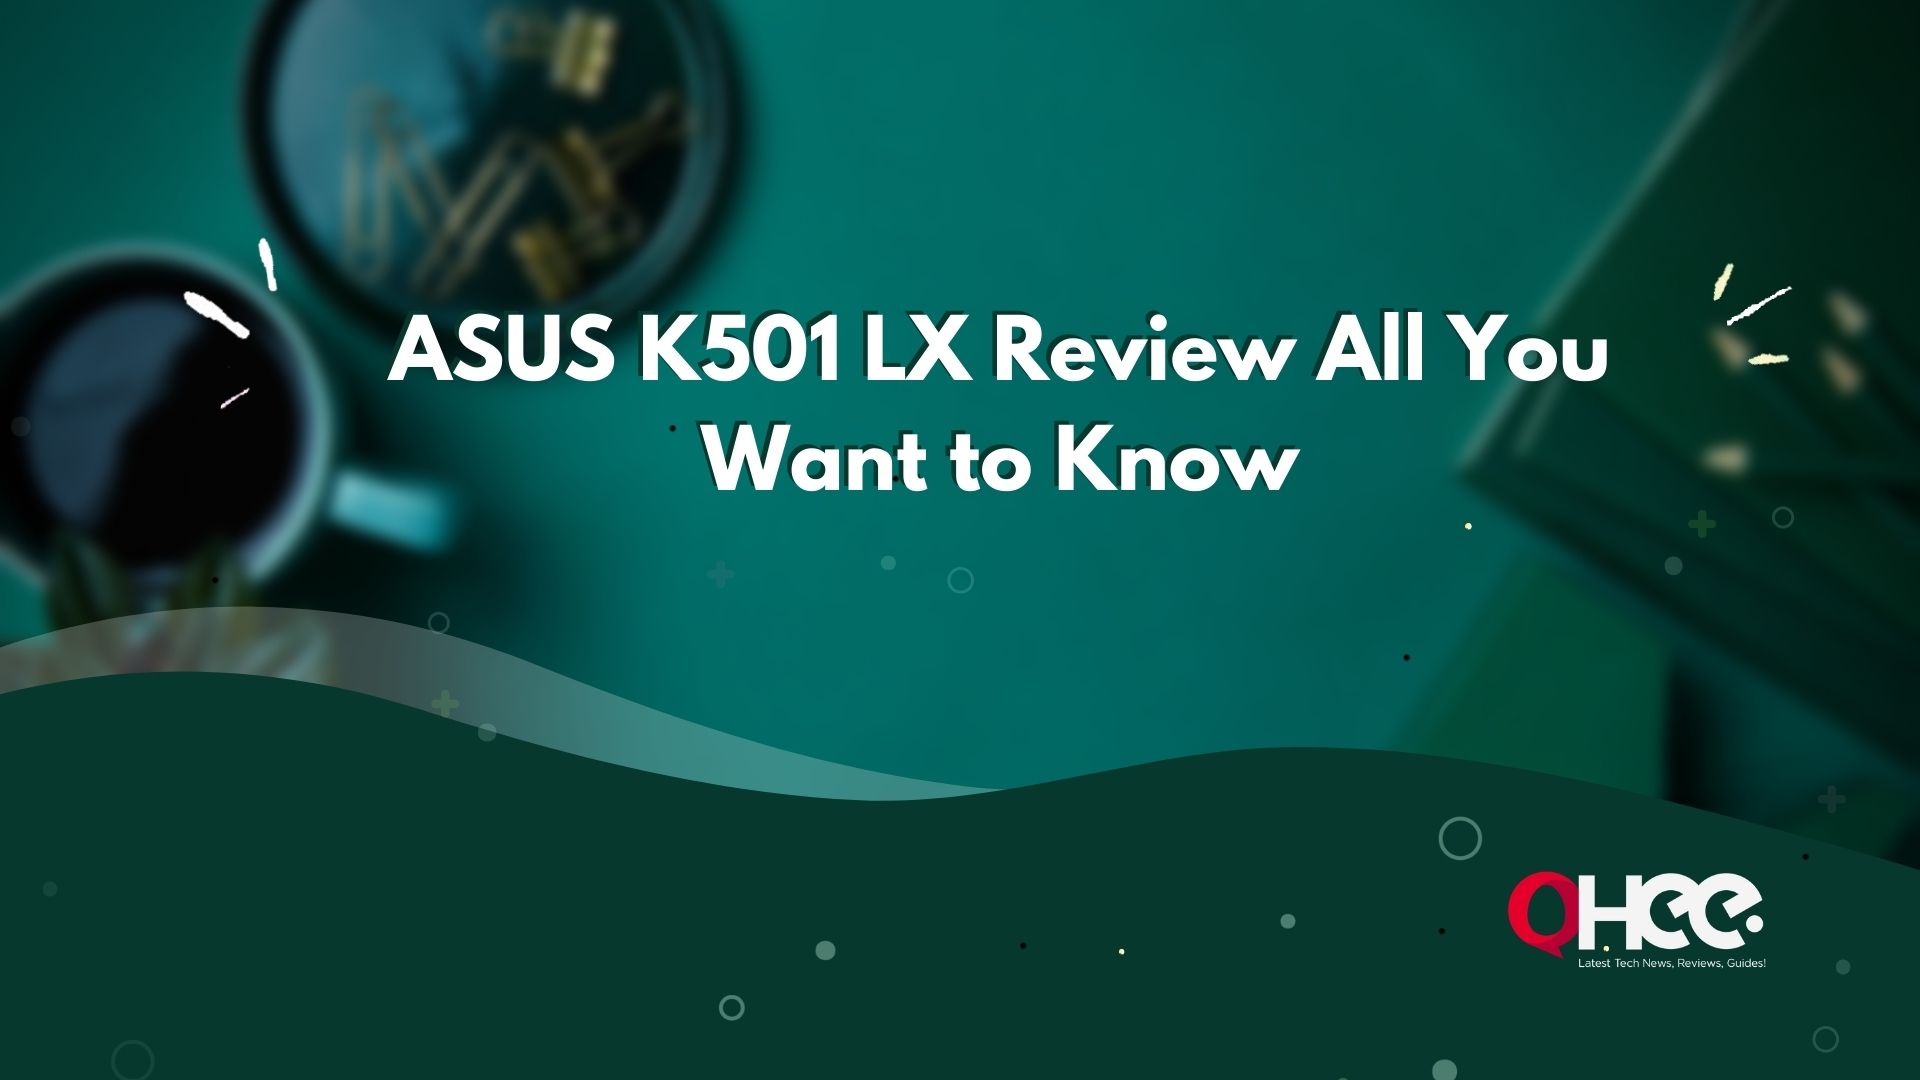 ASUS K501 LX Review All You Want to Know